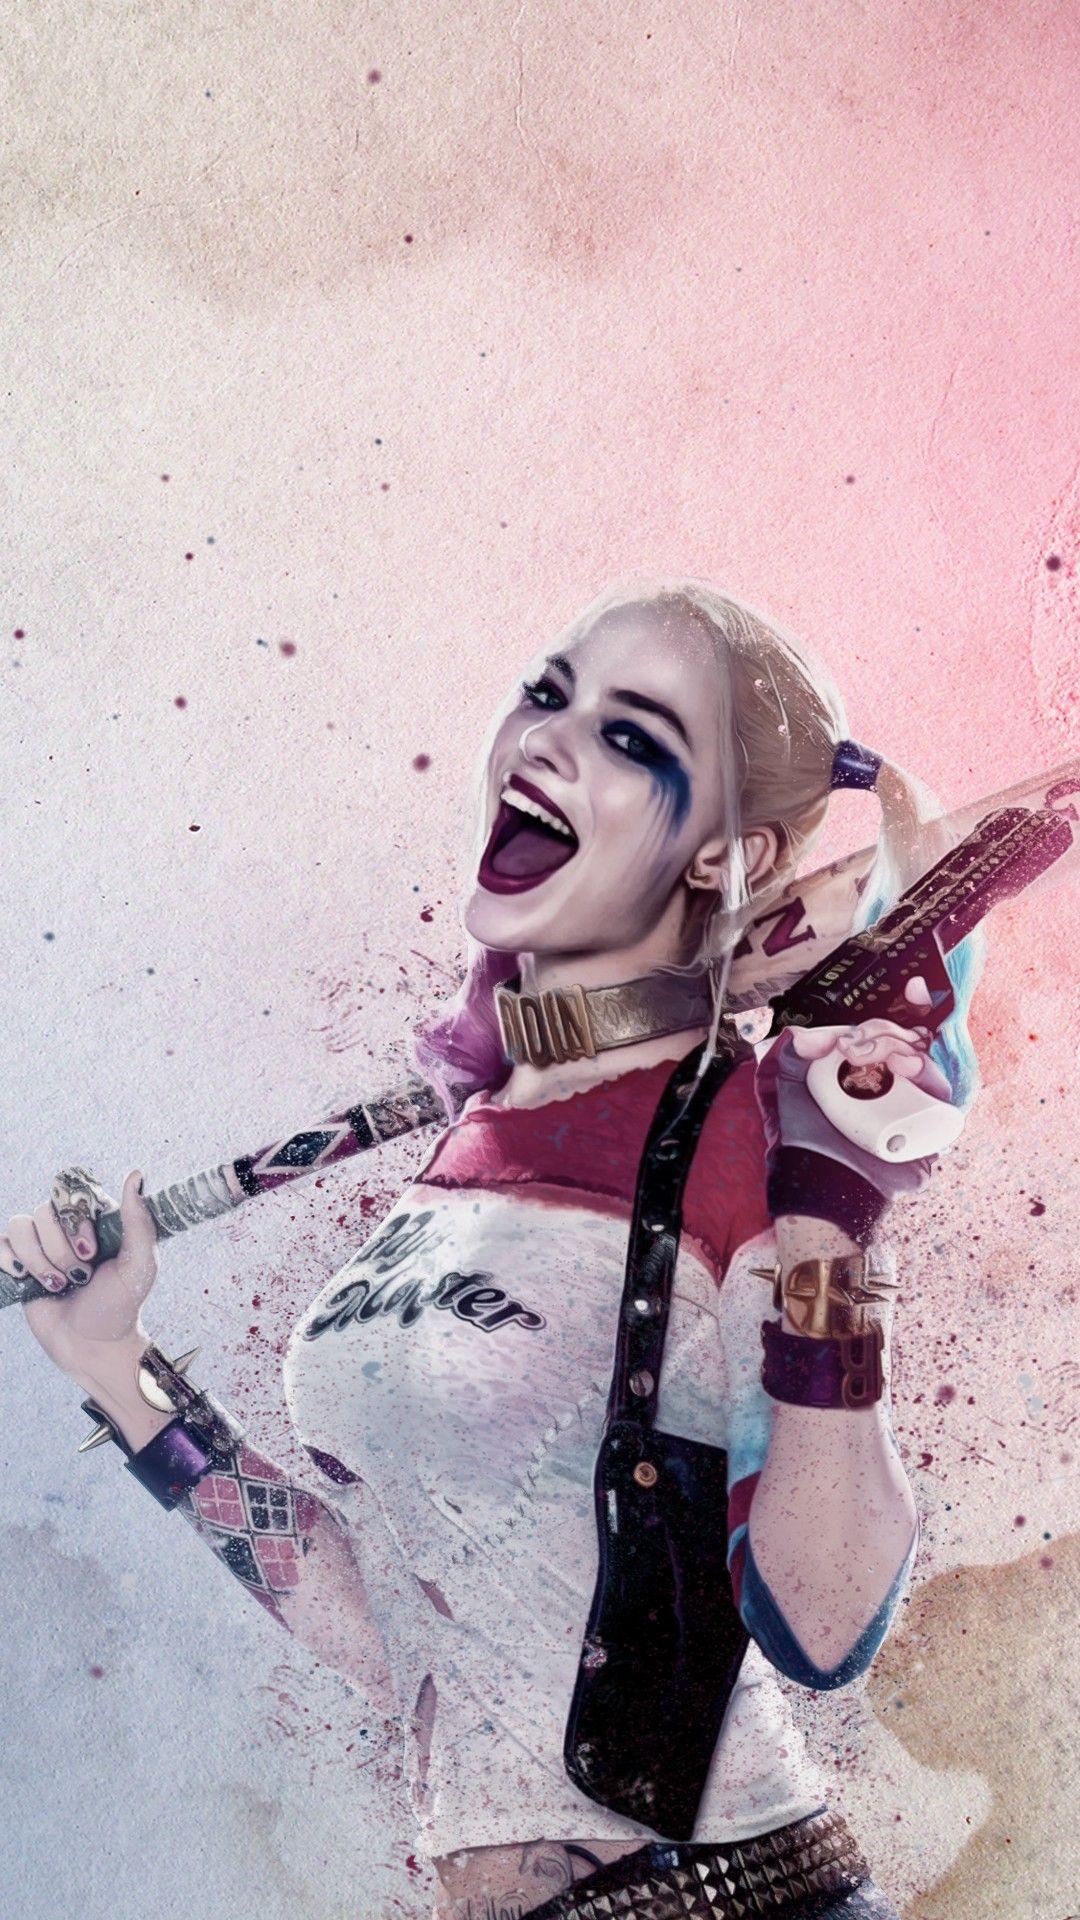 Suicide Squad Iphone Wallpapers Top Free Suicide Squad Iphone Images, Photos, Reviews